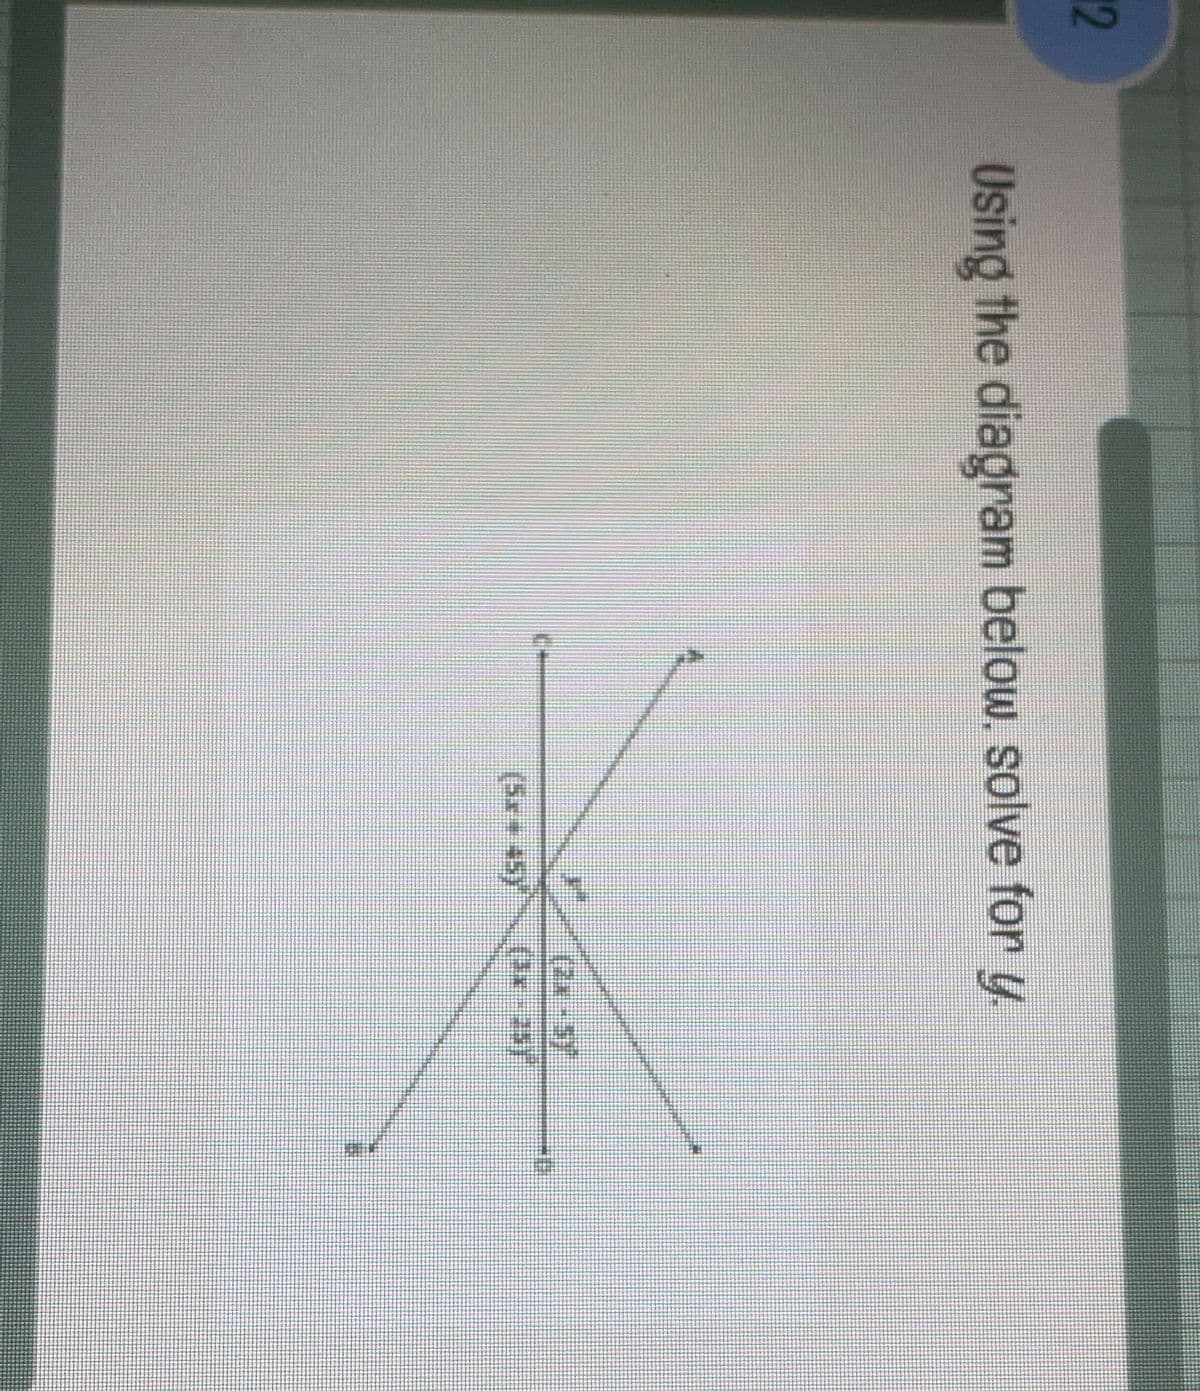 12
Using the diagram below. solve for y.
(2x-5)
(3x-25)